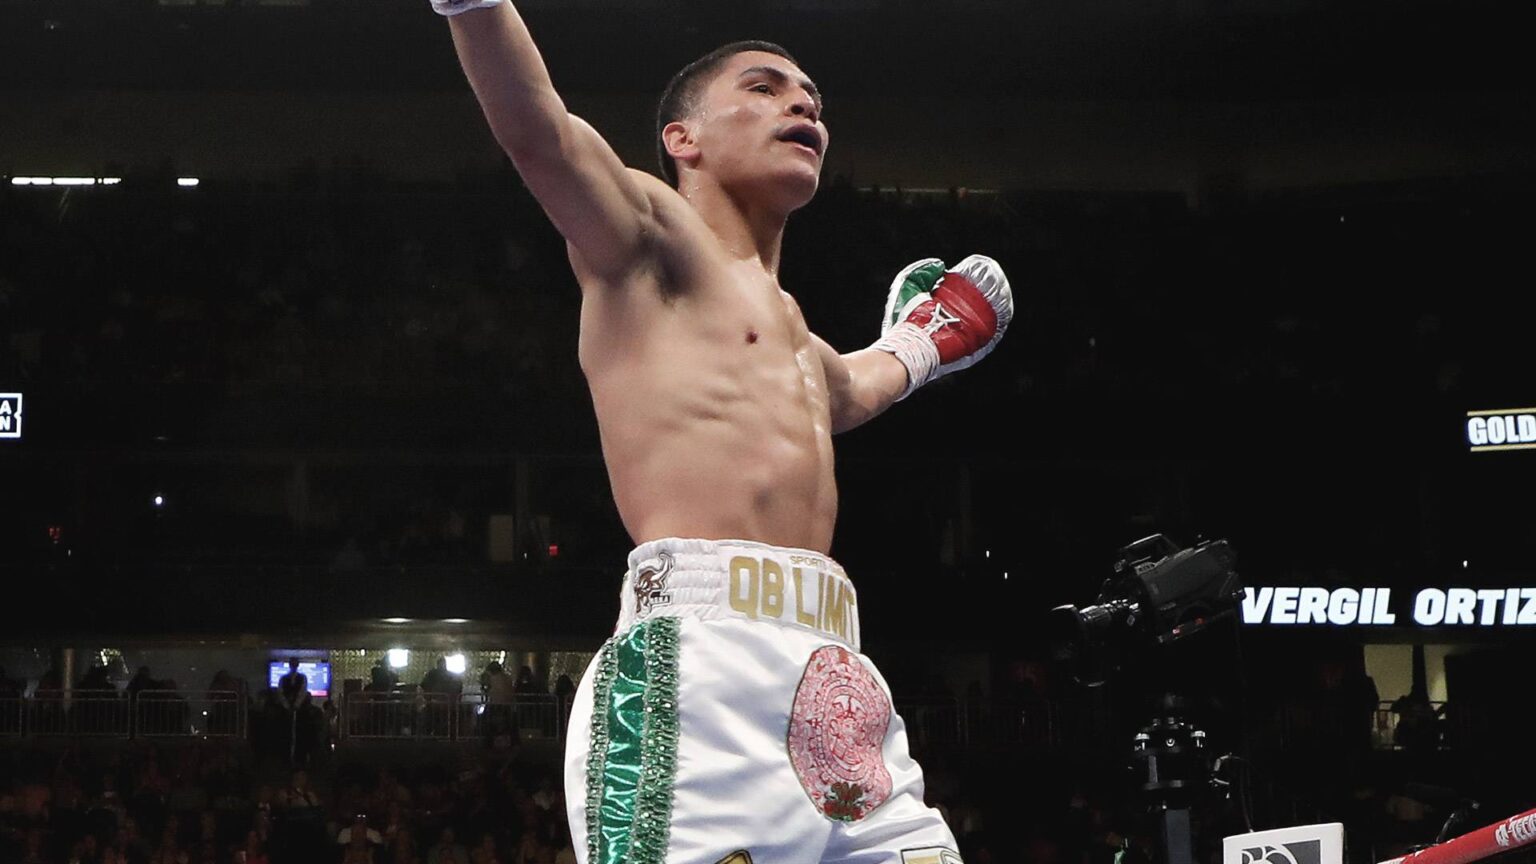 Vergil Ortiz Jr. Plans To Stay At 147lbs Until He Gets A Title Boxing